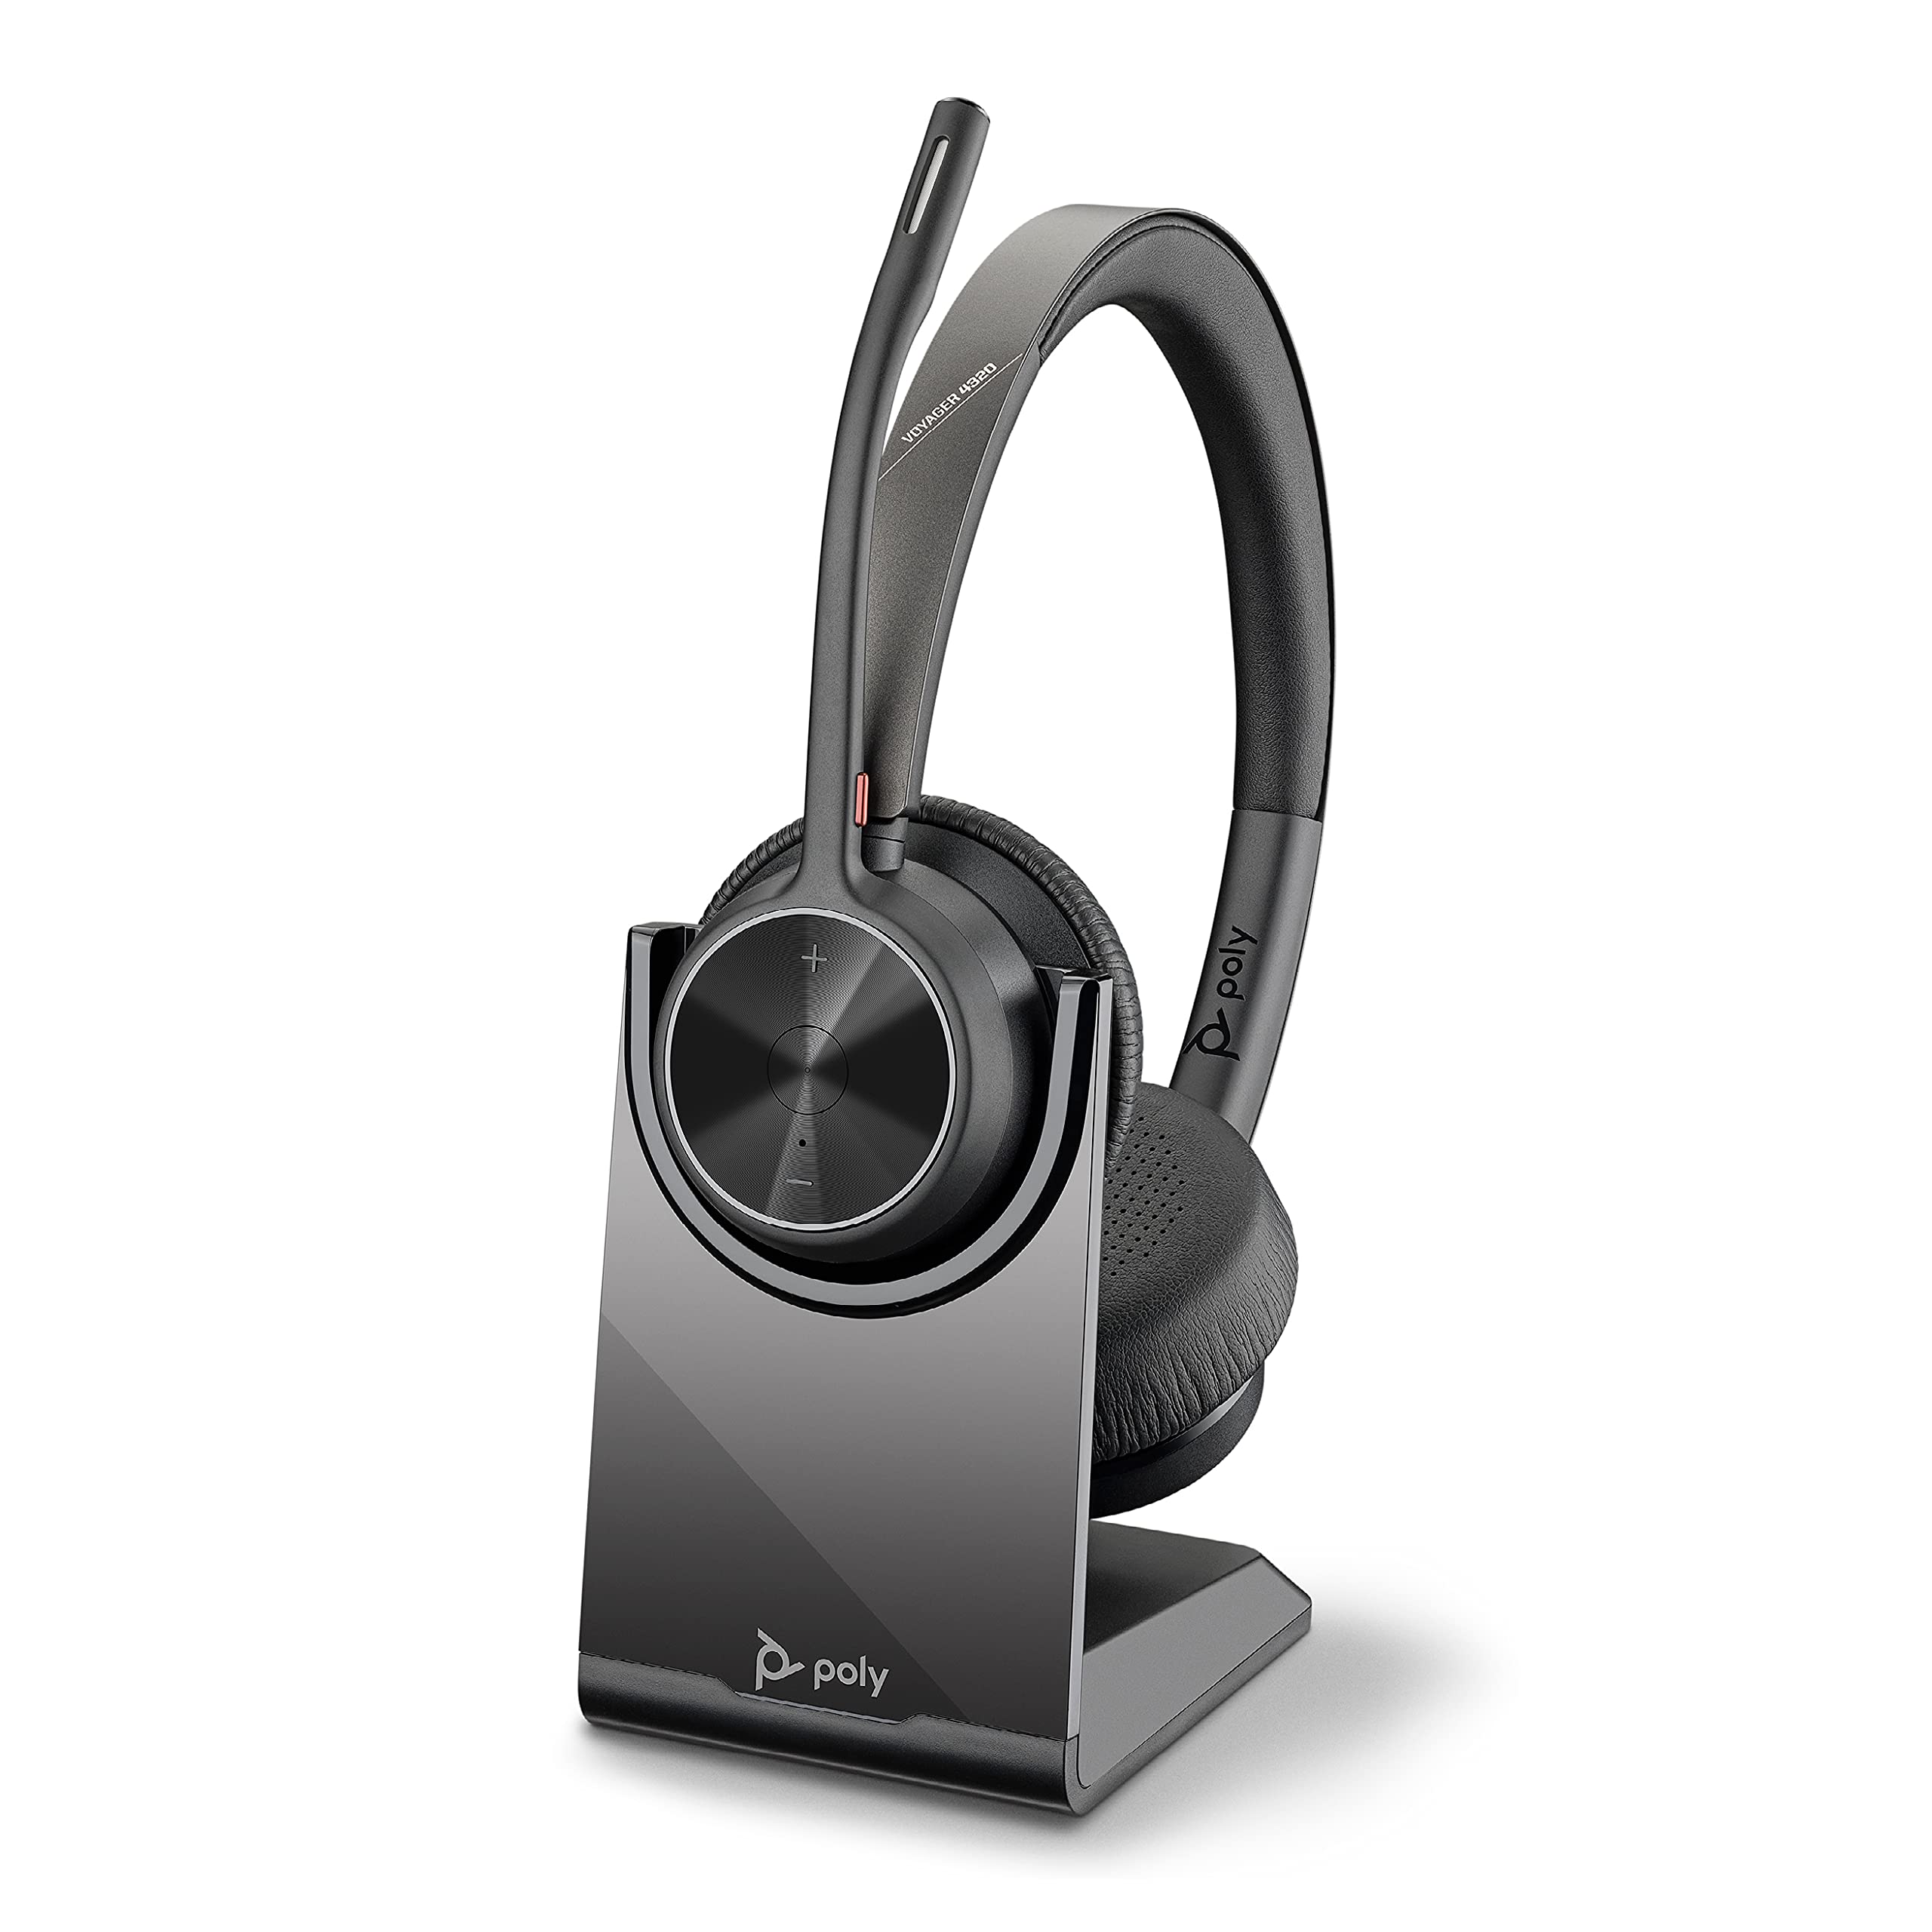 Poly - Voyager 4320 UC Wireless Headset + Charge Stand (Plantronics) - Headphones with Boom Mic - Connect to PC/Mac via USB-C Bluetooth Adapter, Ce...